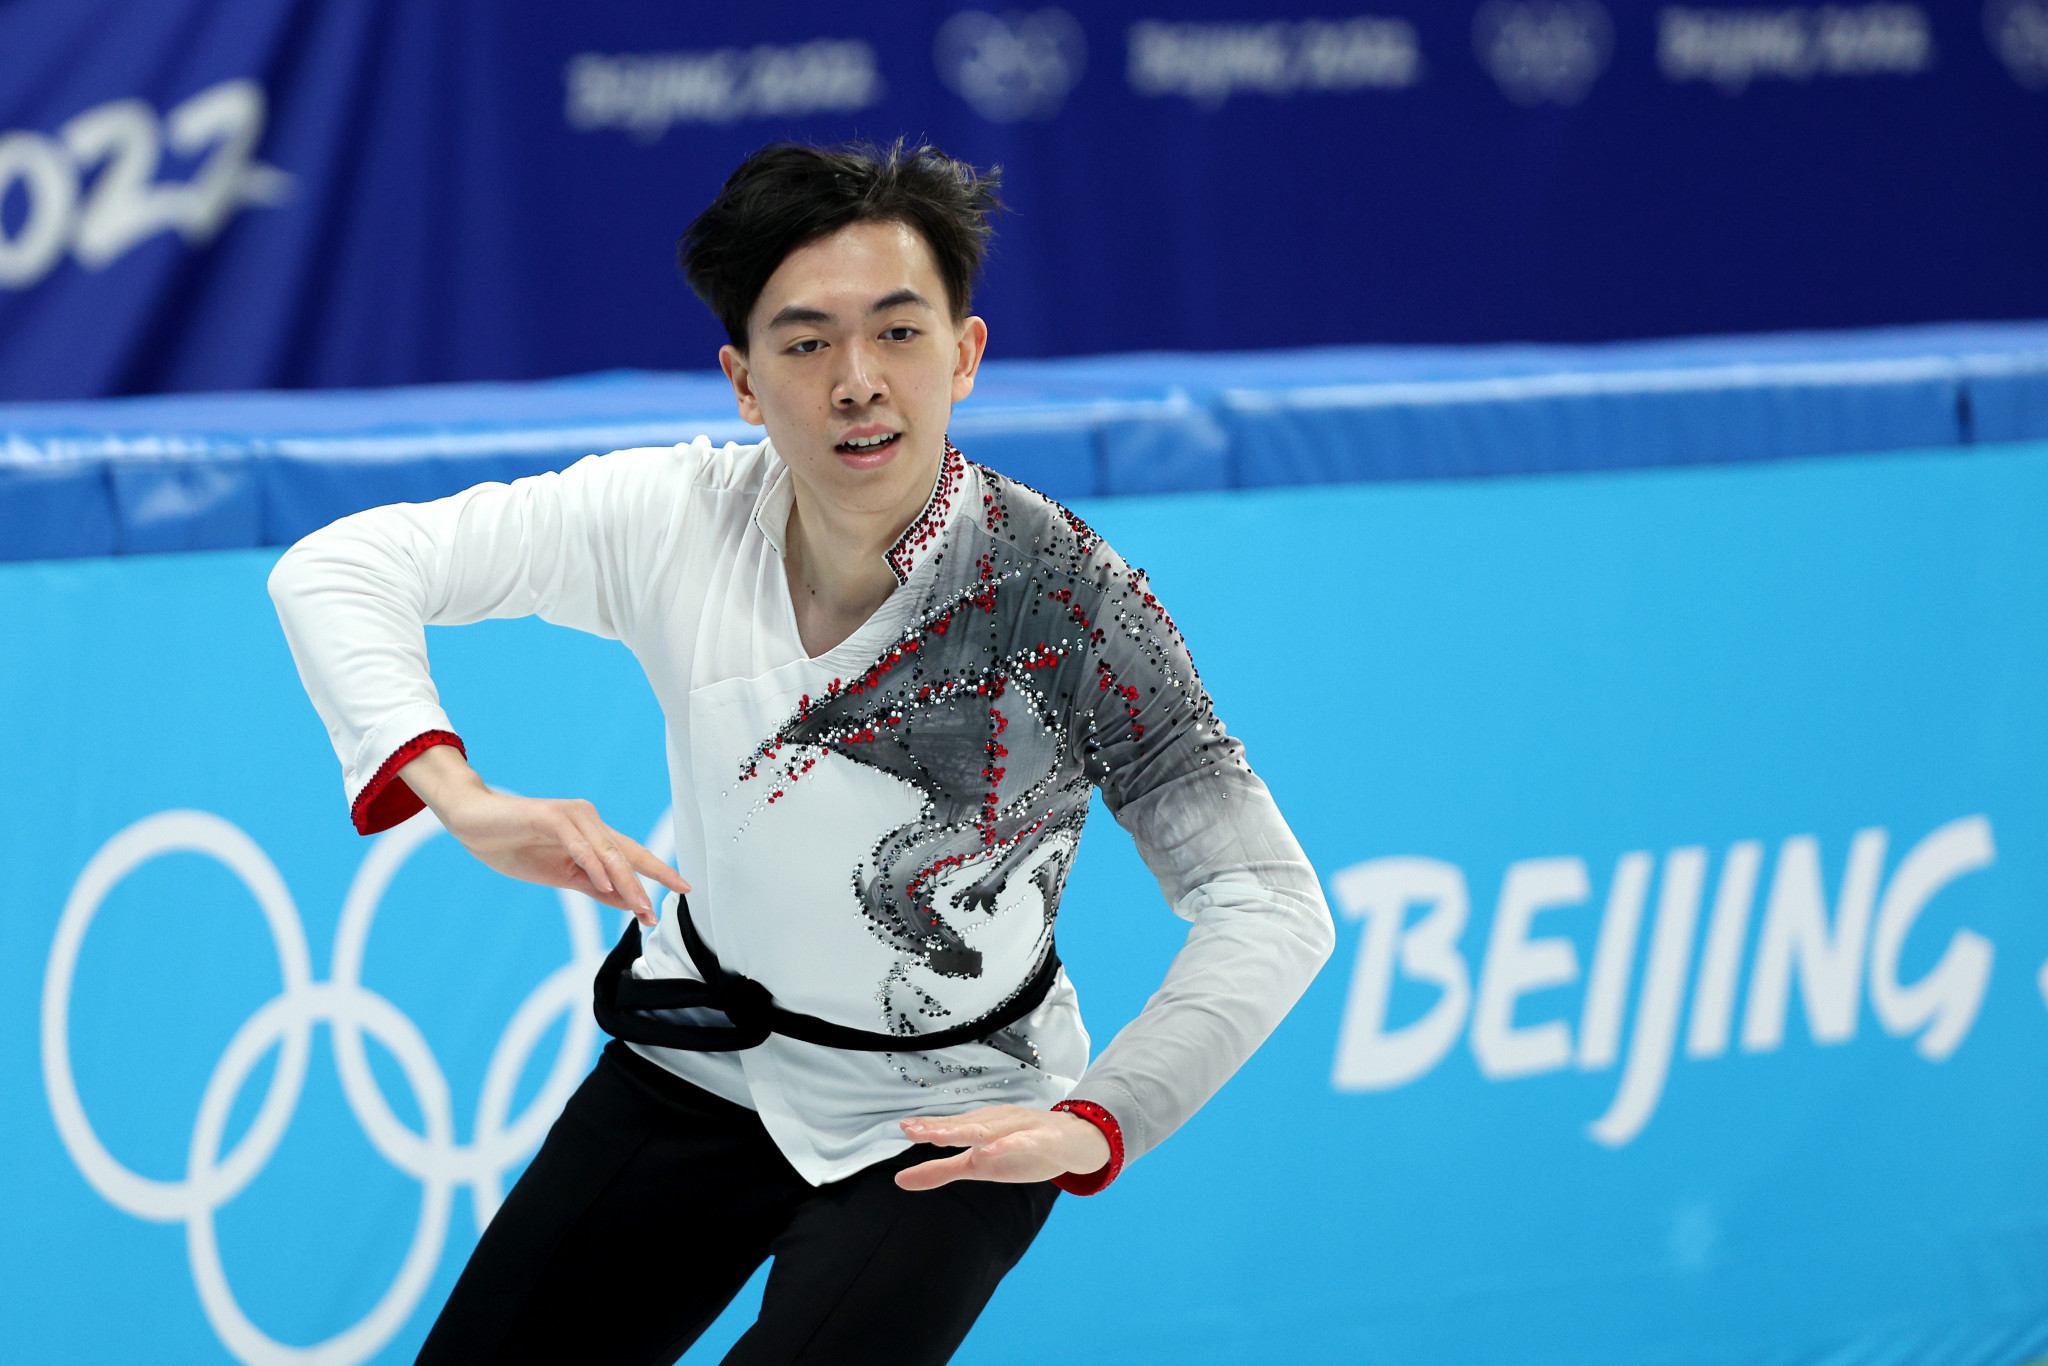 American figure skater Zhou out of men's singles following second positive COVID-19 test